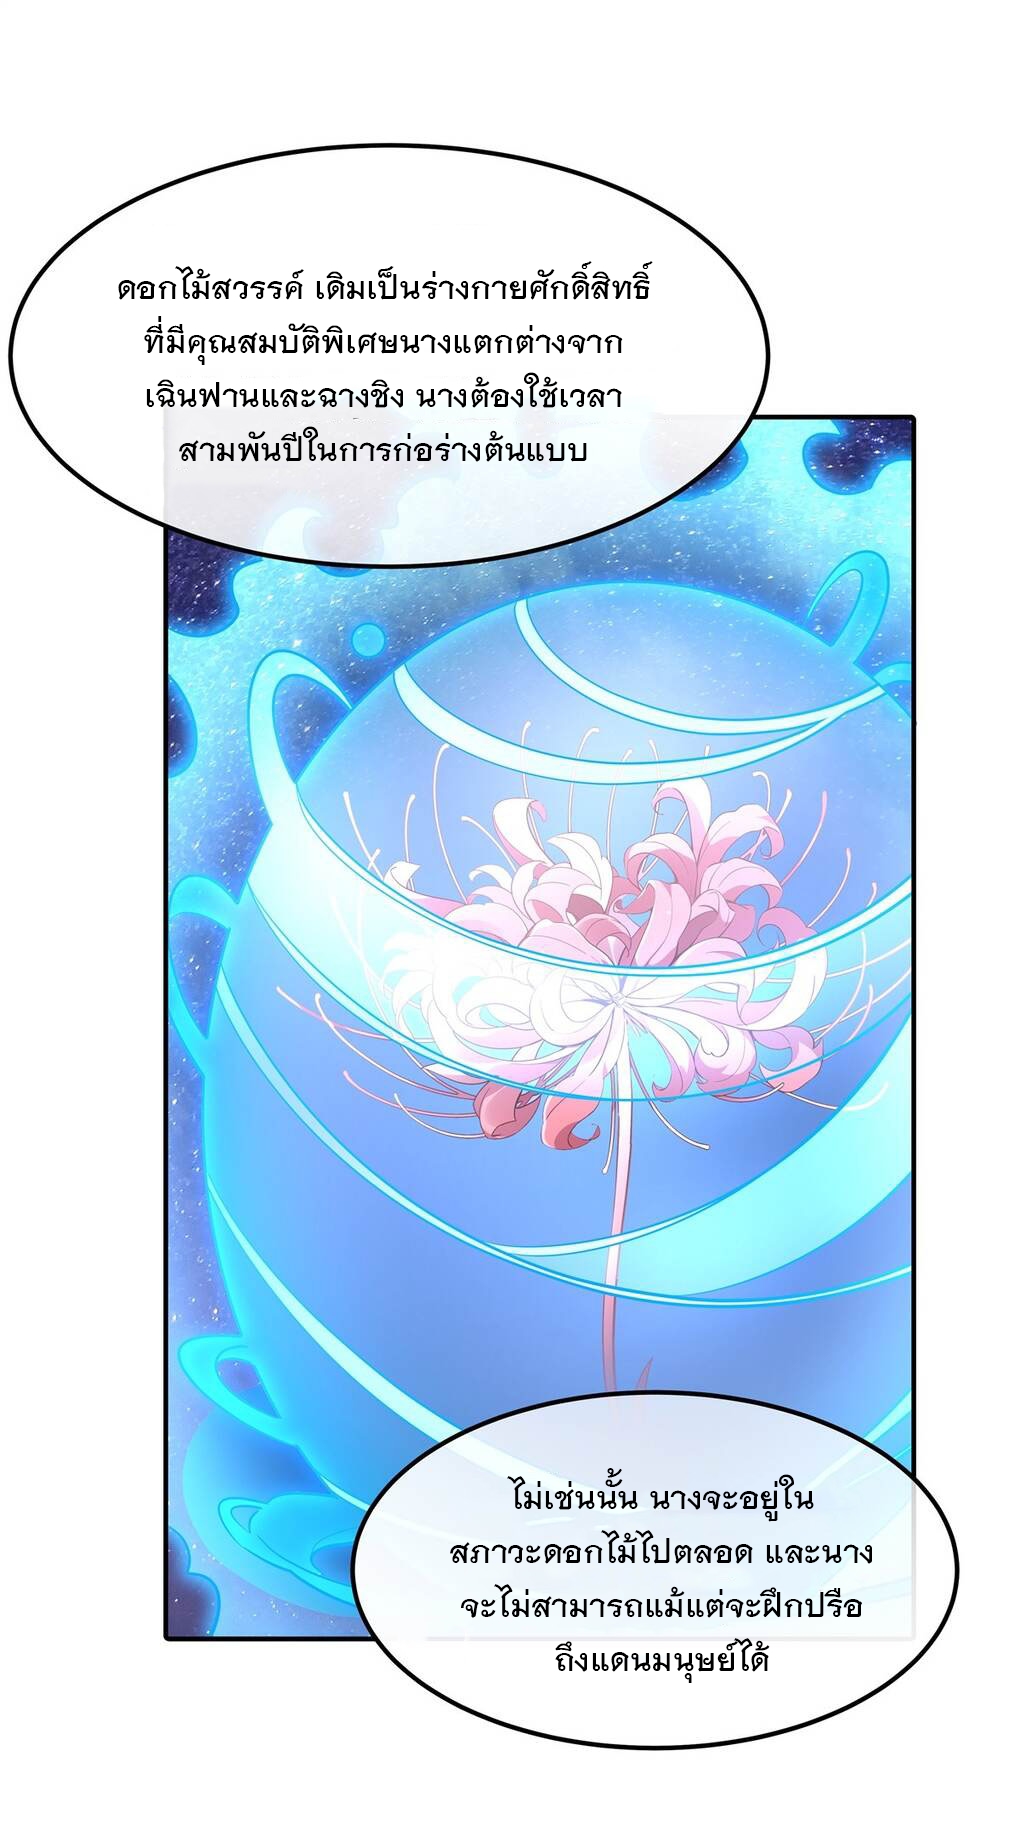 My Female Apprentices Are All Big Shots From the Future Ã Â¸â€¢Ã Â¸Â­Ã Â¸â„¢Ã Â¸â€”Ã Â¸ÂµÃ Â¹Ë† 92 (33)